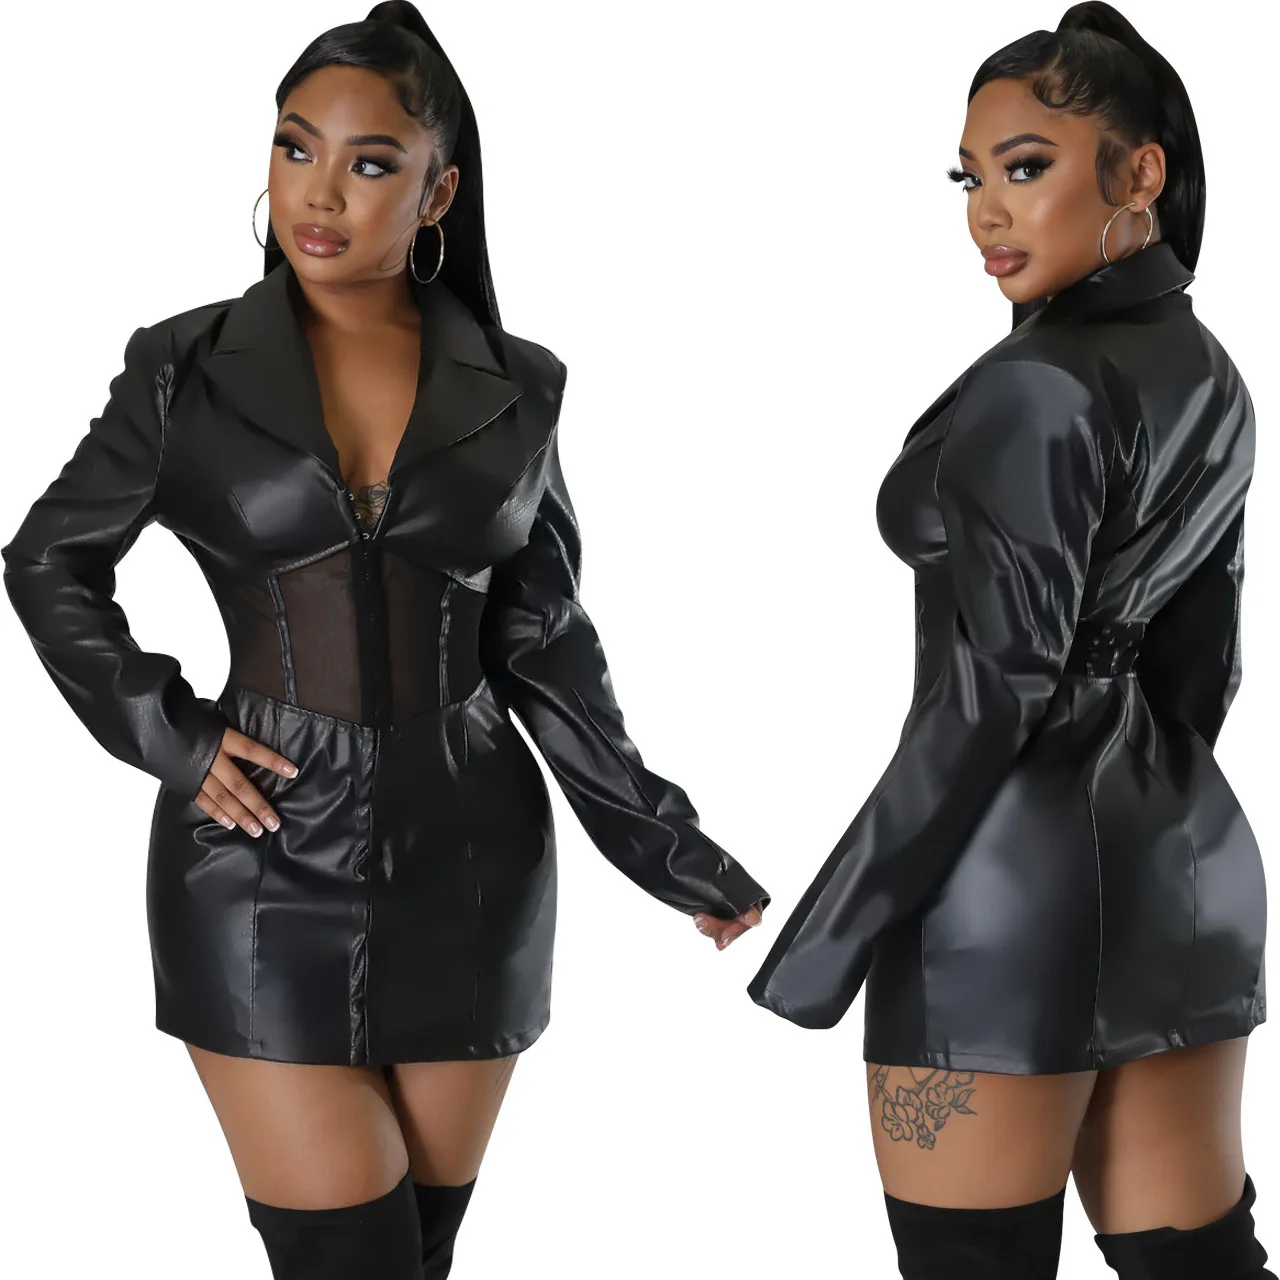 

Leather Jackets Women's Sexy Flocked Leather V-neck Mesh Patchwork Long Sleeved Waistband Leather Outerwear Coat Clothing